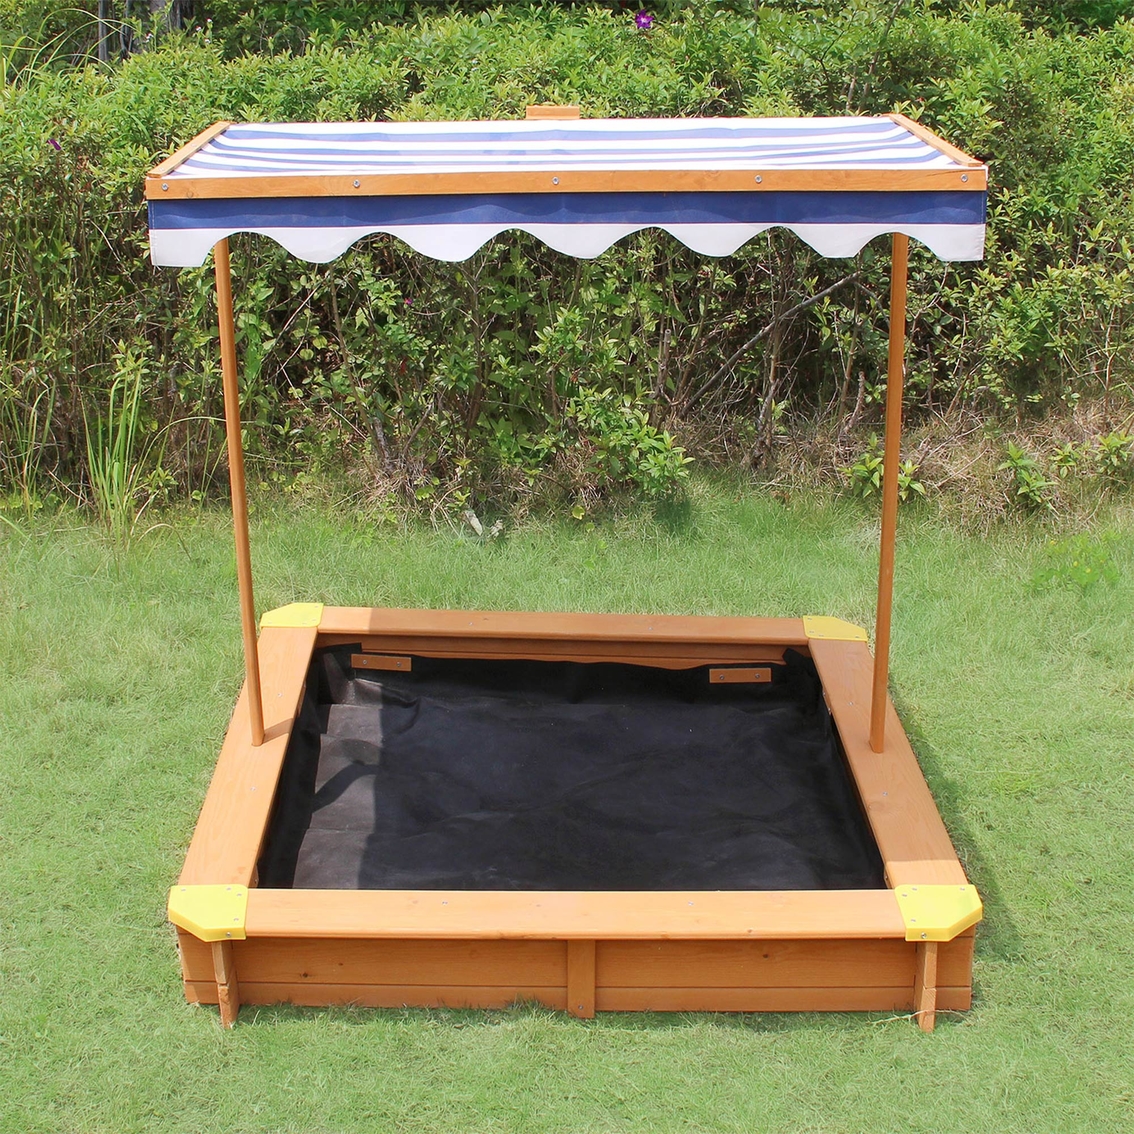 Turtleplay Sandbox with Canopy - Image 2 of 4